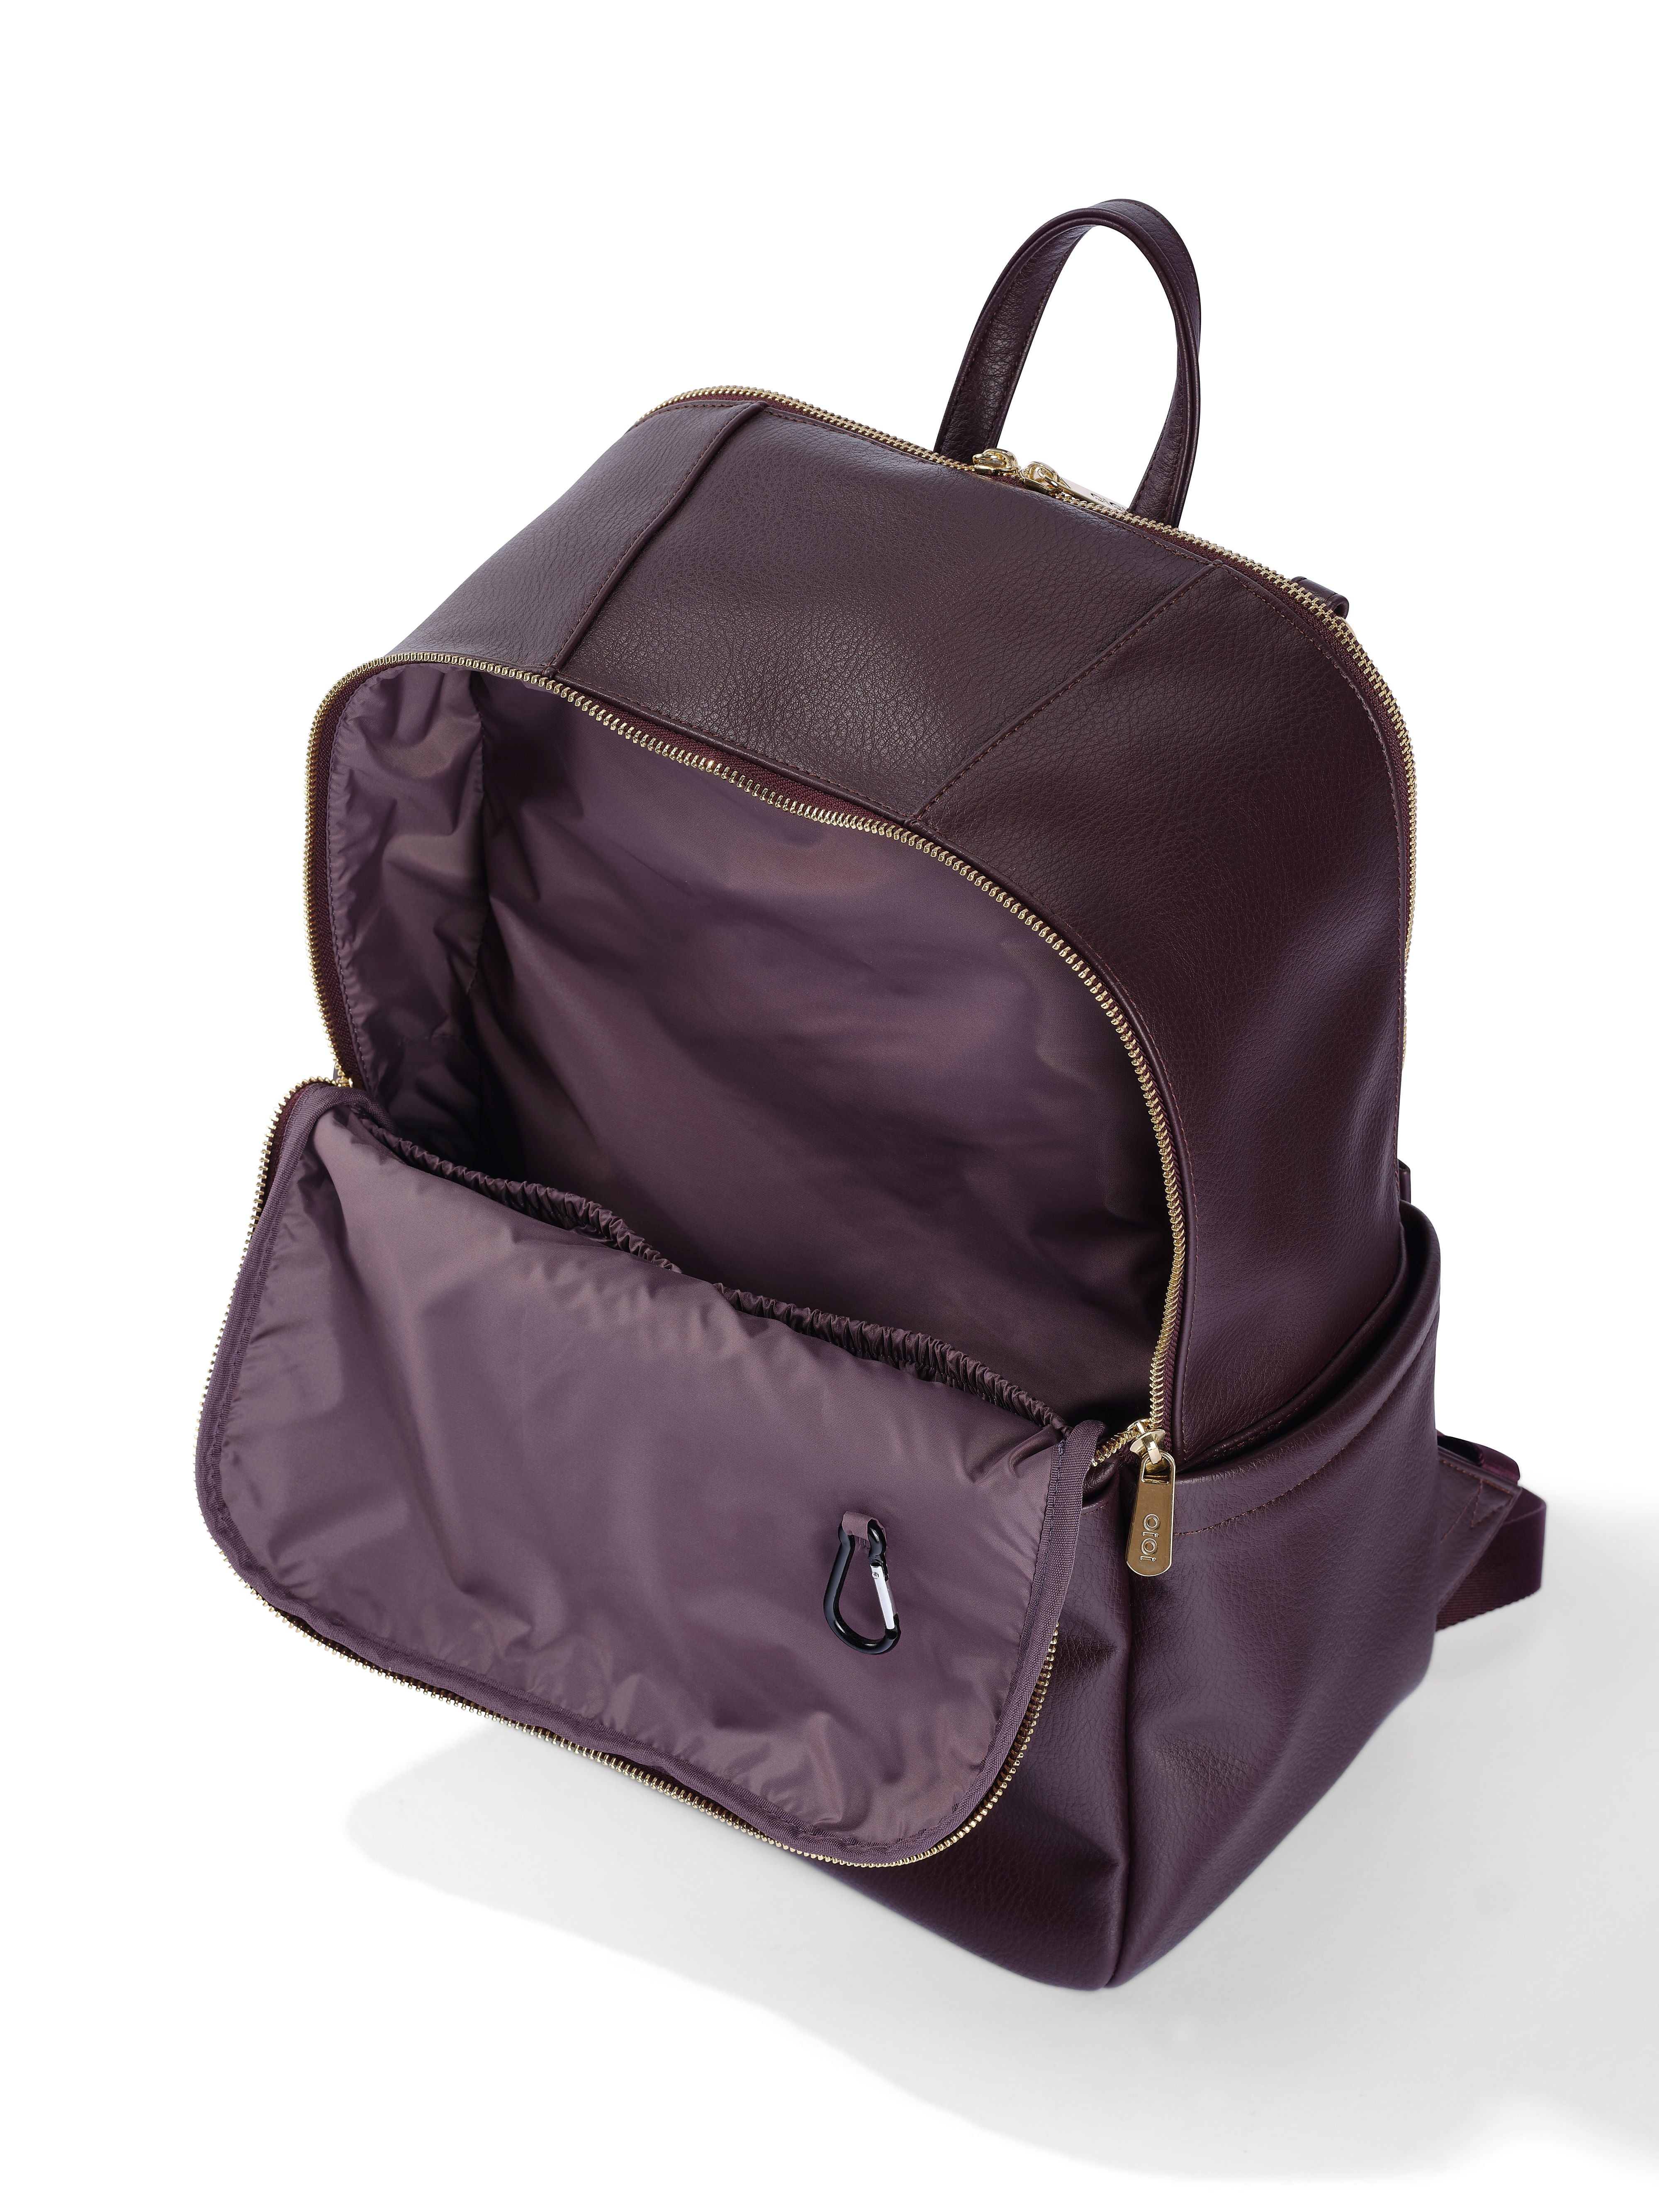 OiOi Multitasker Nappy Backpack Mulberry Vegan Leather